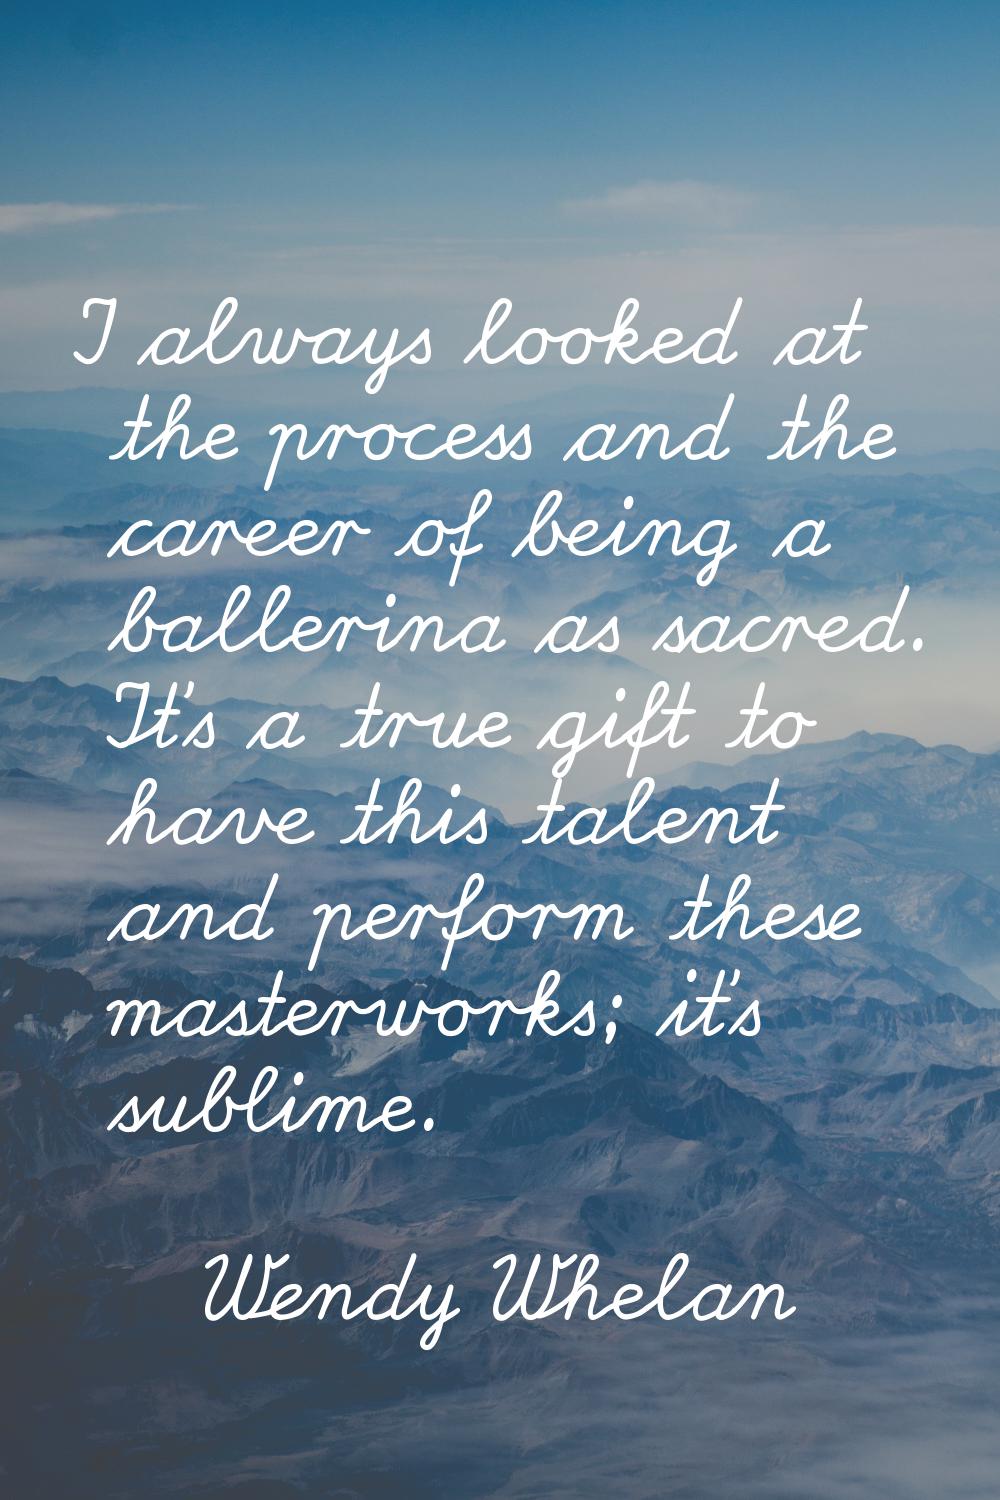 I always looked at the process and the career of being a ballerina as sacred. It's a true gift to h